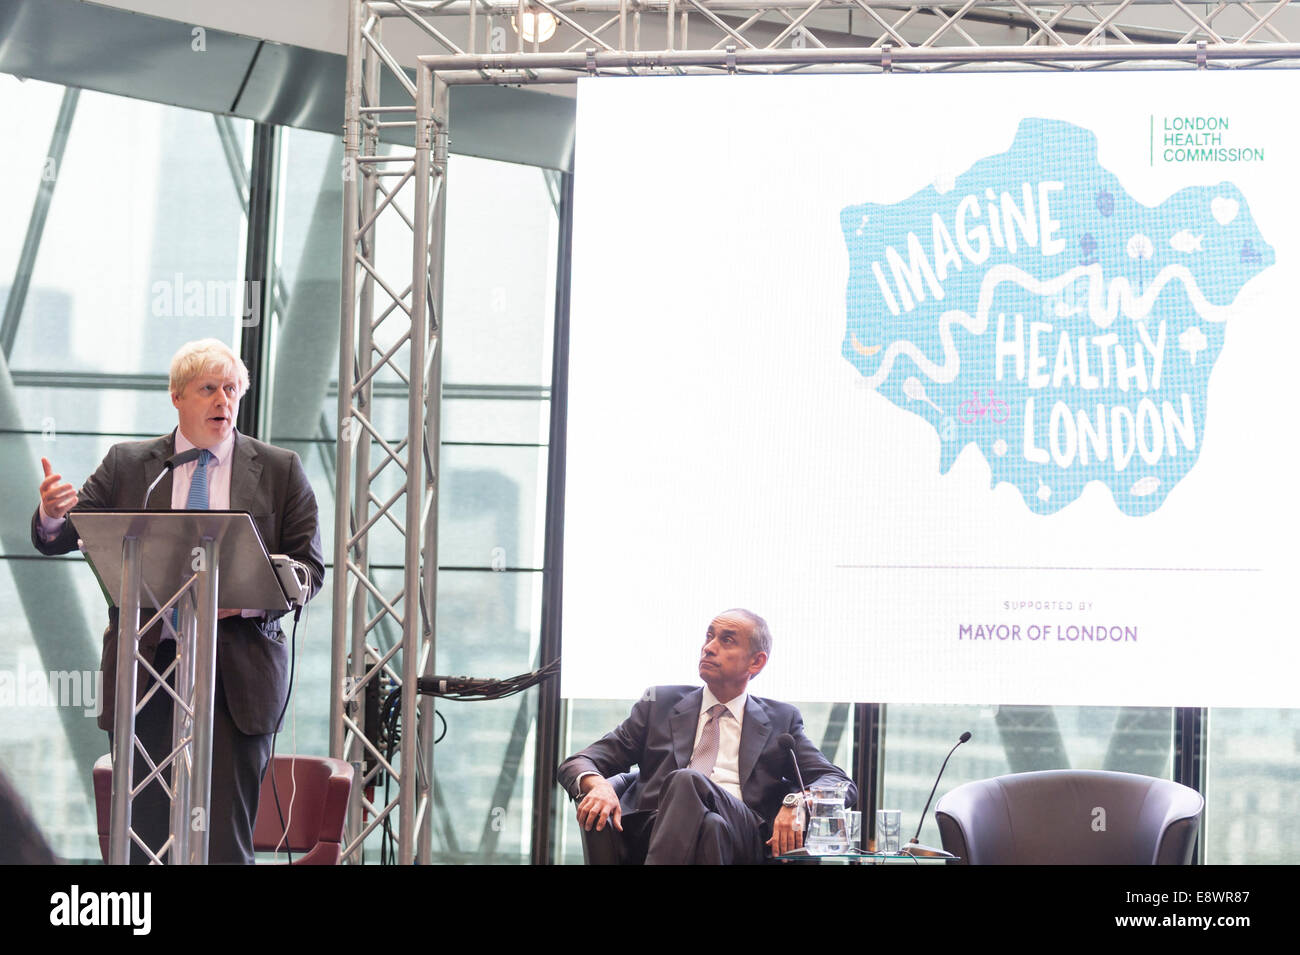 London, UK. 15th October, 2014.  Pioneering surgeon and former health minister, Lord Ara Darzi, presents the final report of the London Health Commission to the Mayor of London Boris Johnson at City Hall. The report, Better Health for London, proposes tough measures to combat the threats posed by tobacco, alcohol, obesity, lack of exercise and pollution, which harm millions of people. Together the proposals amount to the biggest public health drive in the world. It contains over 60 recommendations and sets out 10 ambitions for the city with targets. Credit:  Stephen Chung/Alamy Live News Stock Photo